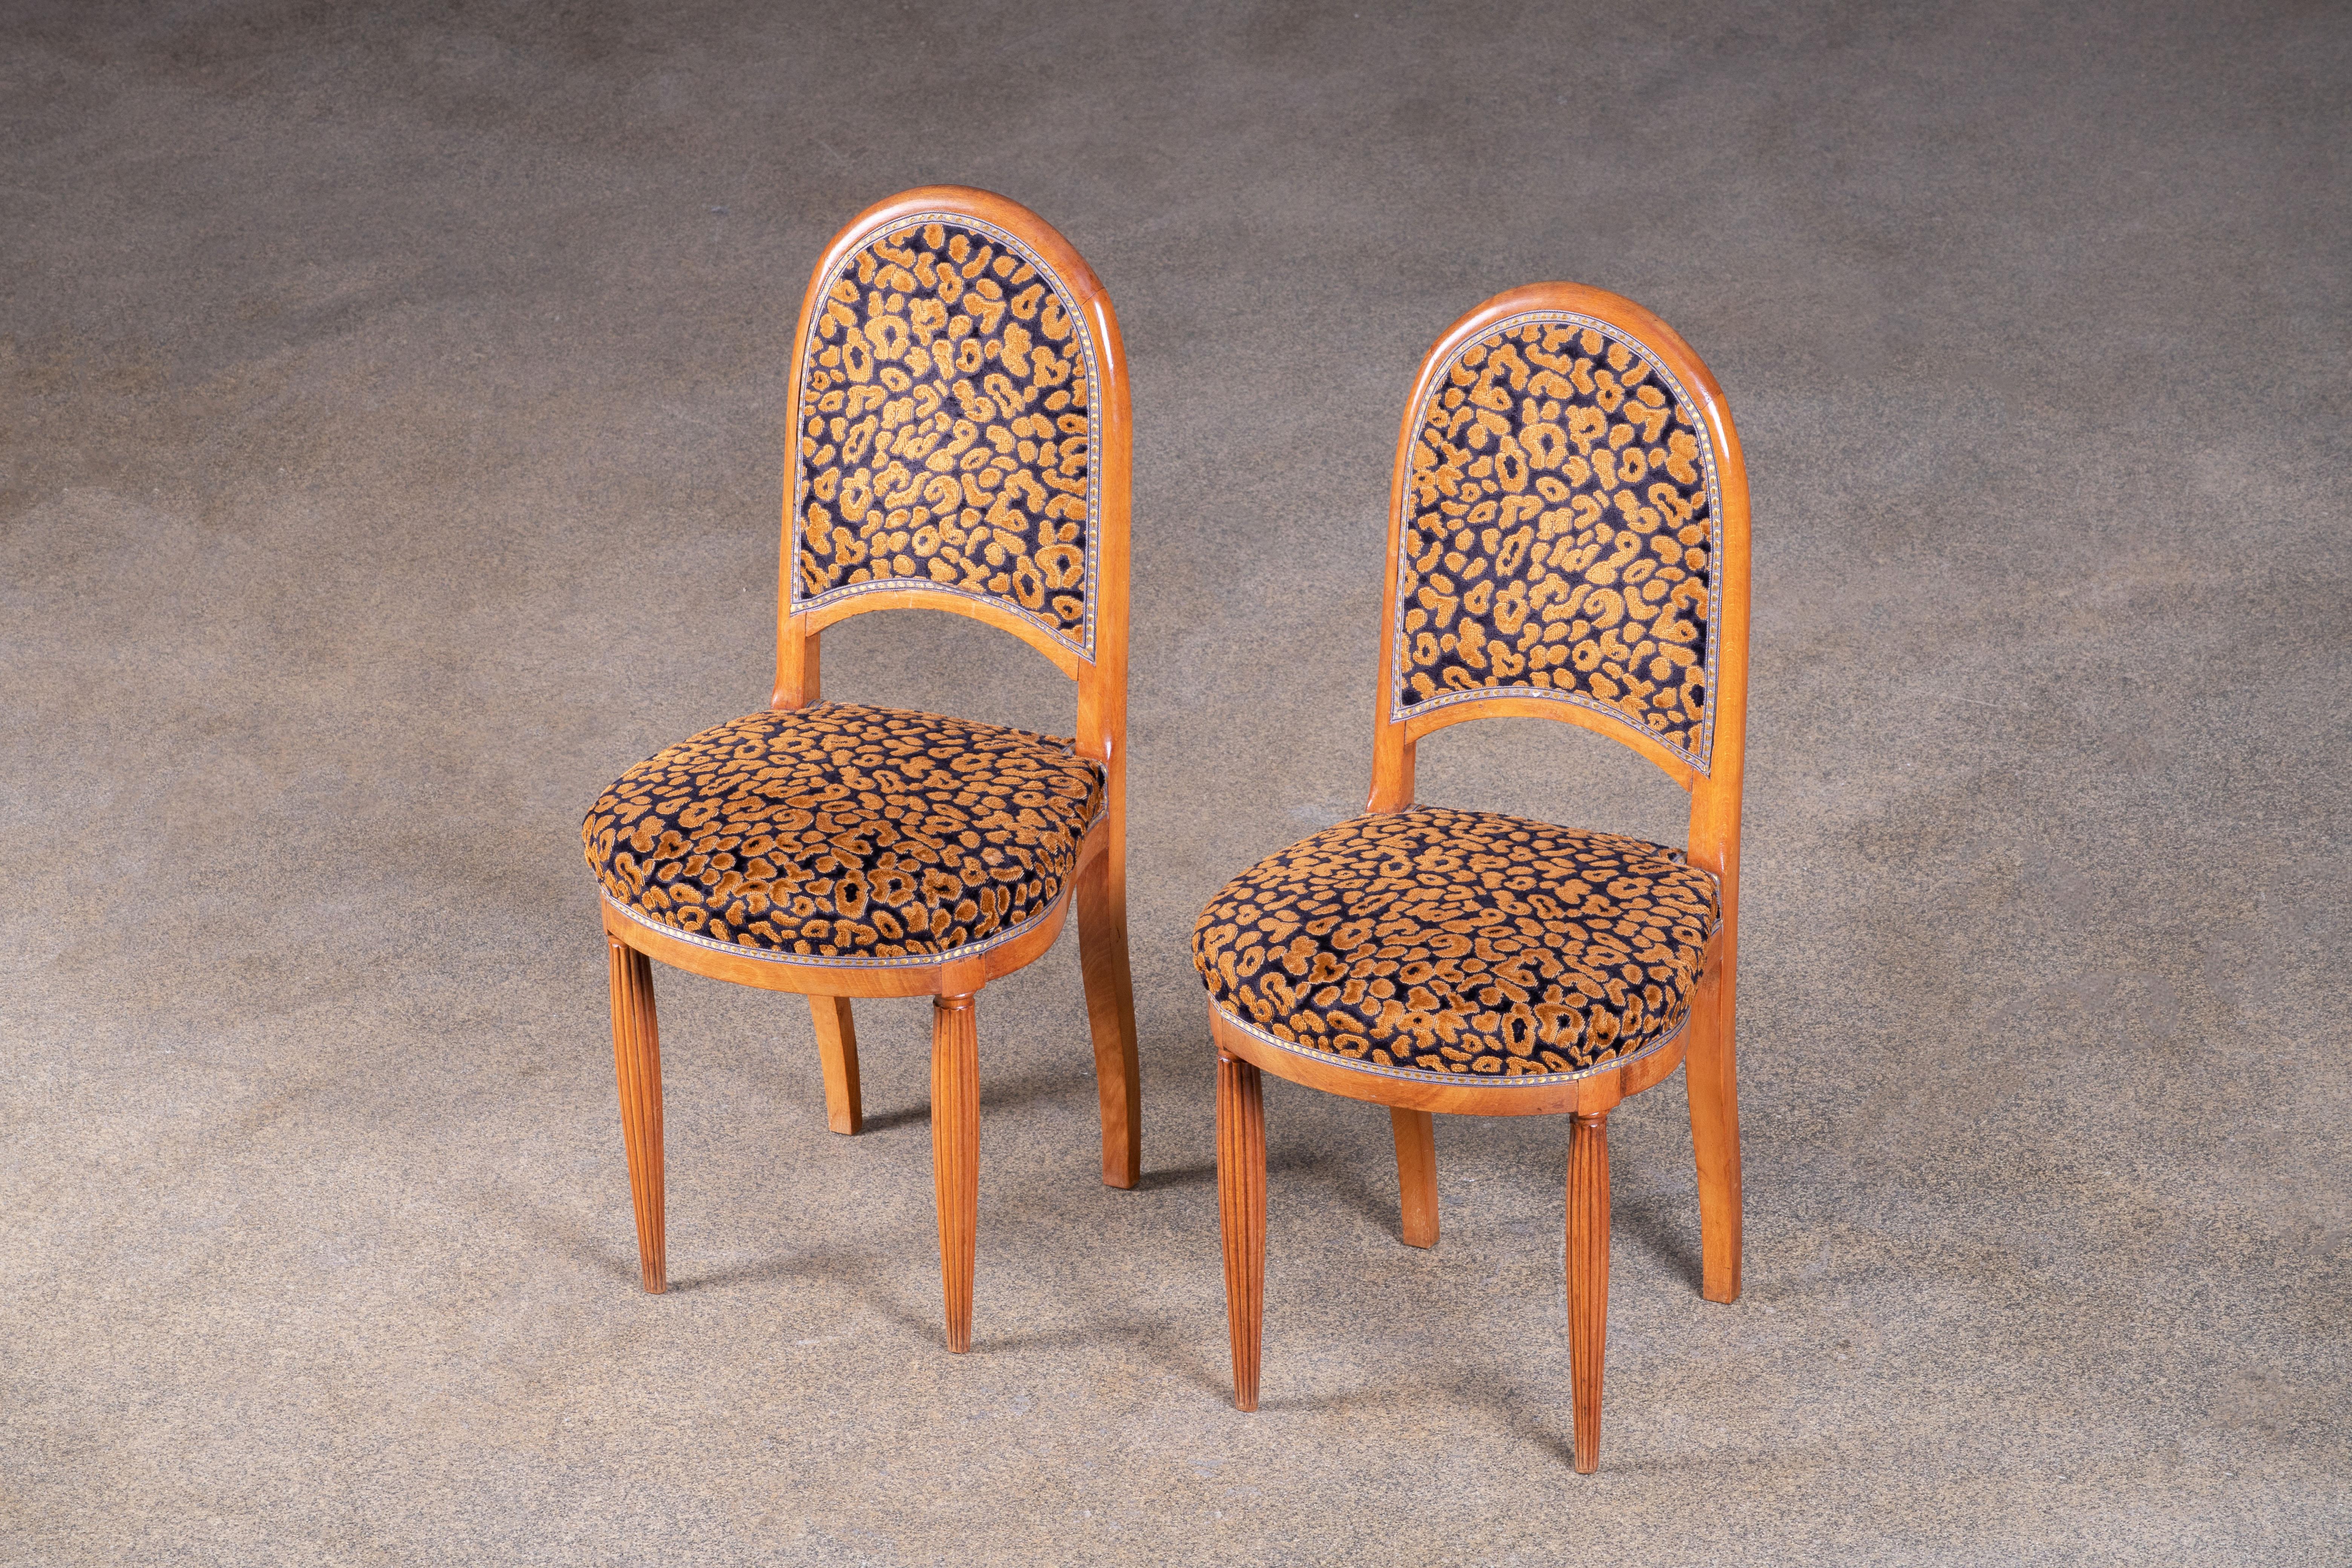 Pair of Art Deco Chairs Att. Maurice Jallot, c1940 For Sale 7